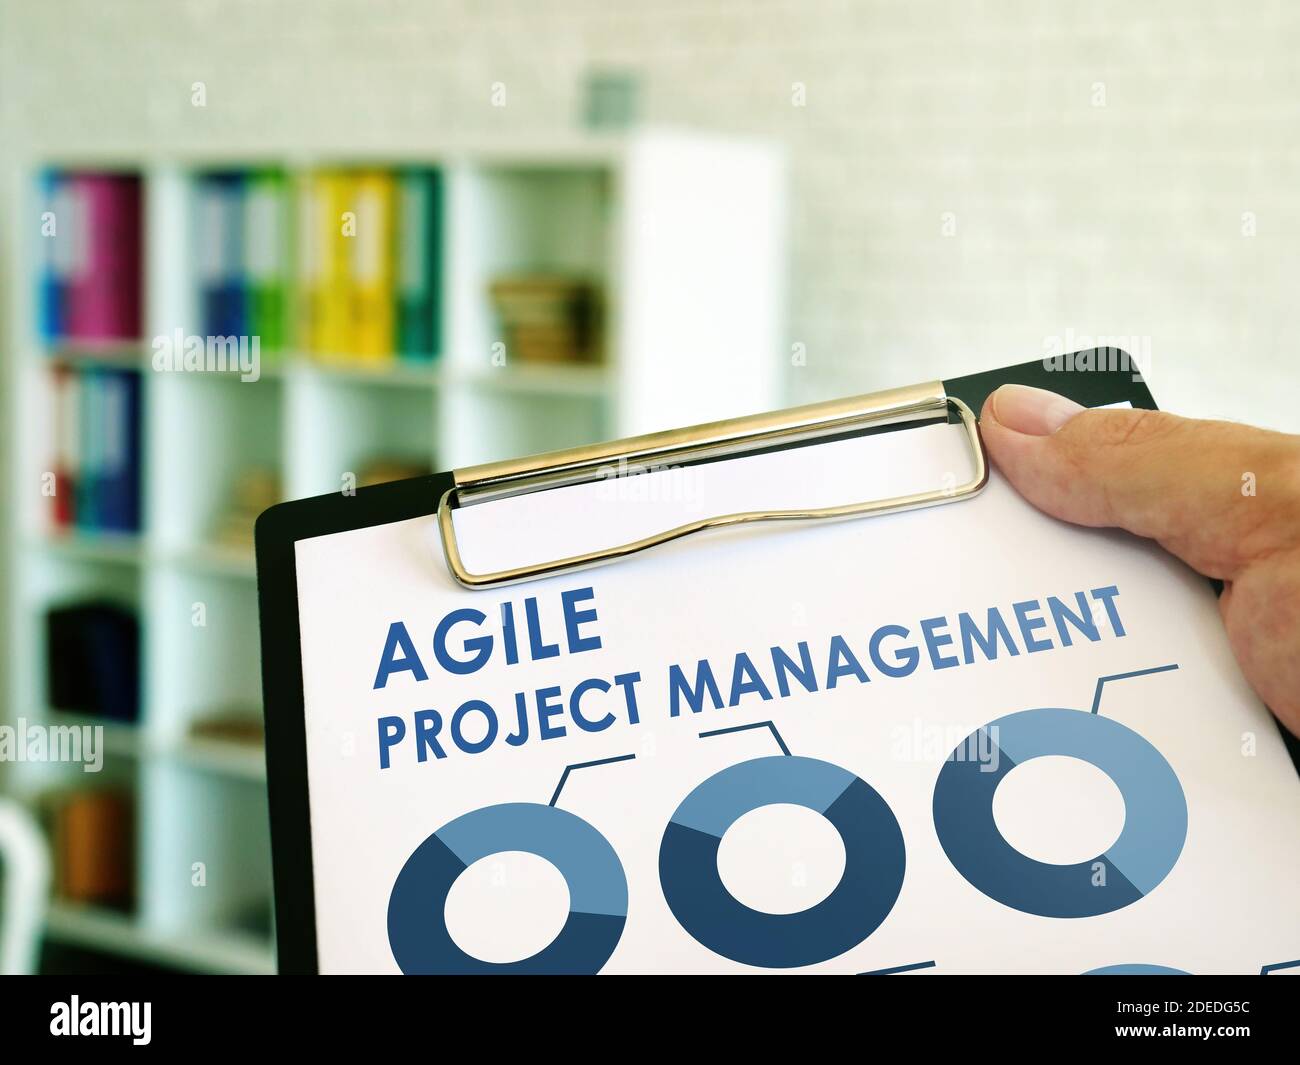 Man reads Agile Project Management information in the book. Stock Photo